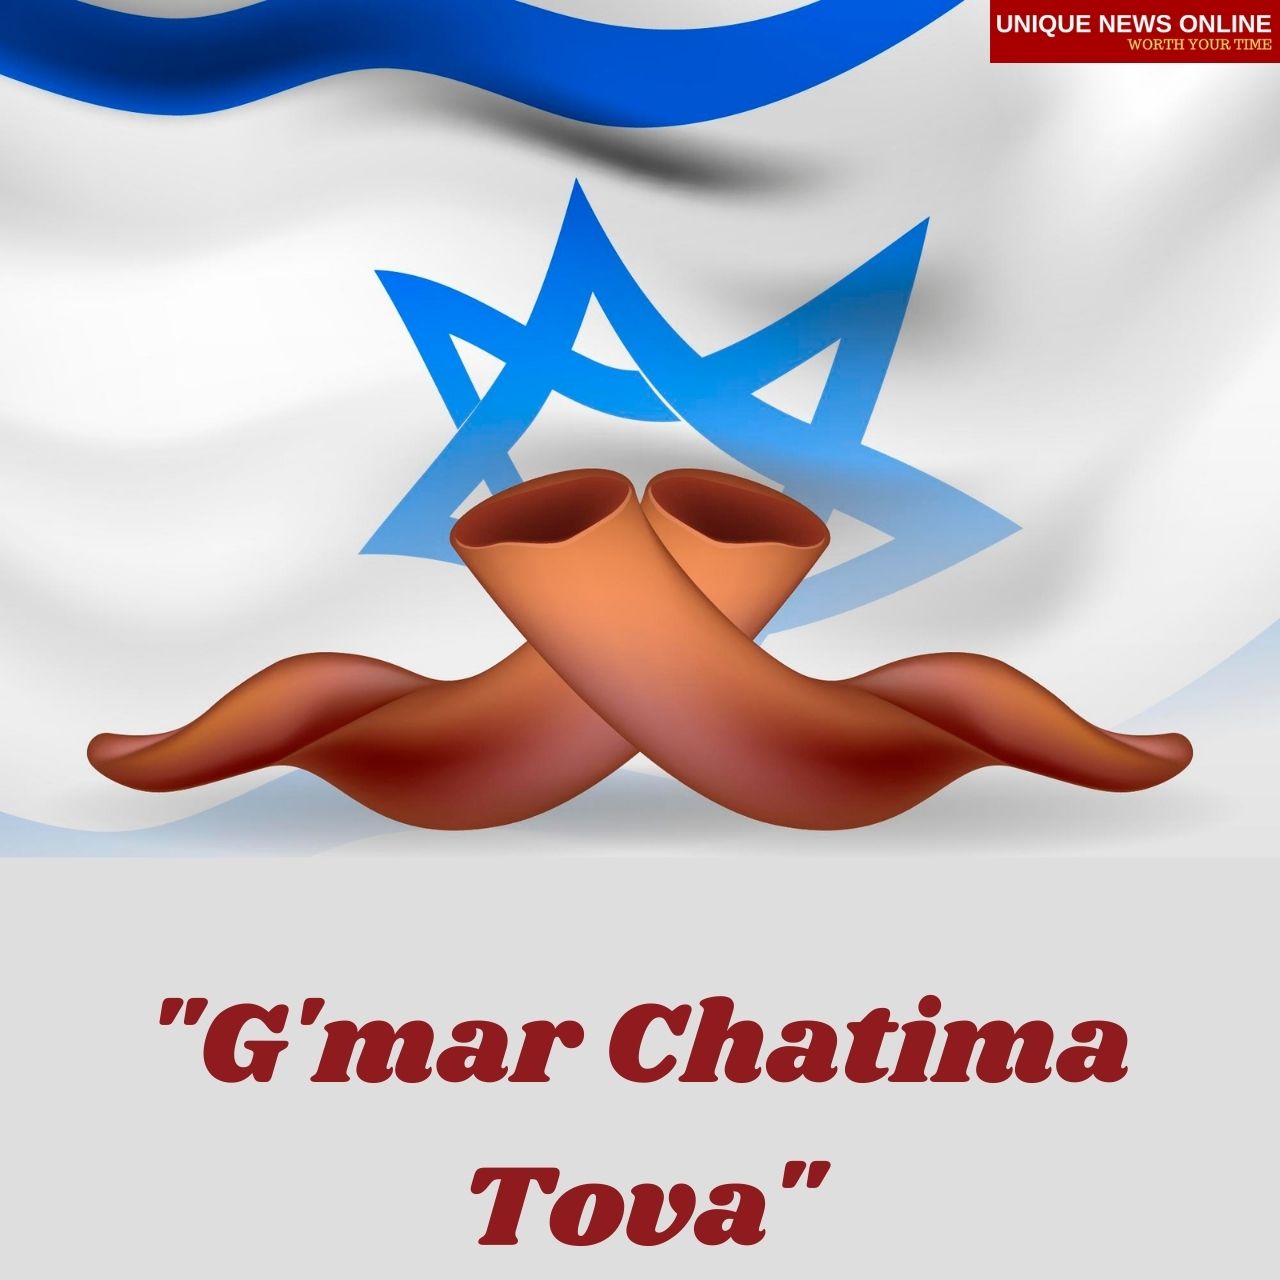 G'mar Chatima Tova 2021 Wishes, Images, Quotes, Messages, and Greetings